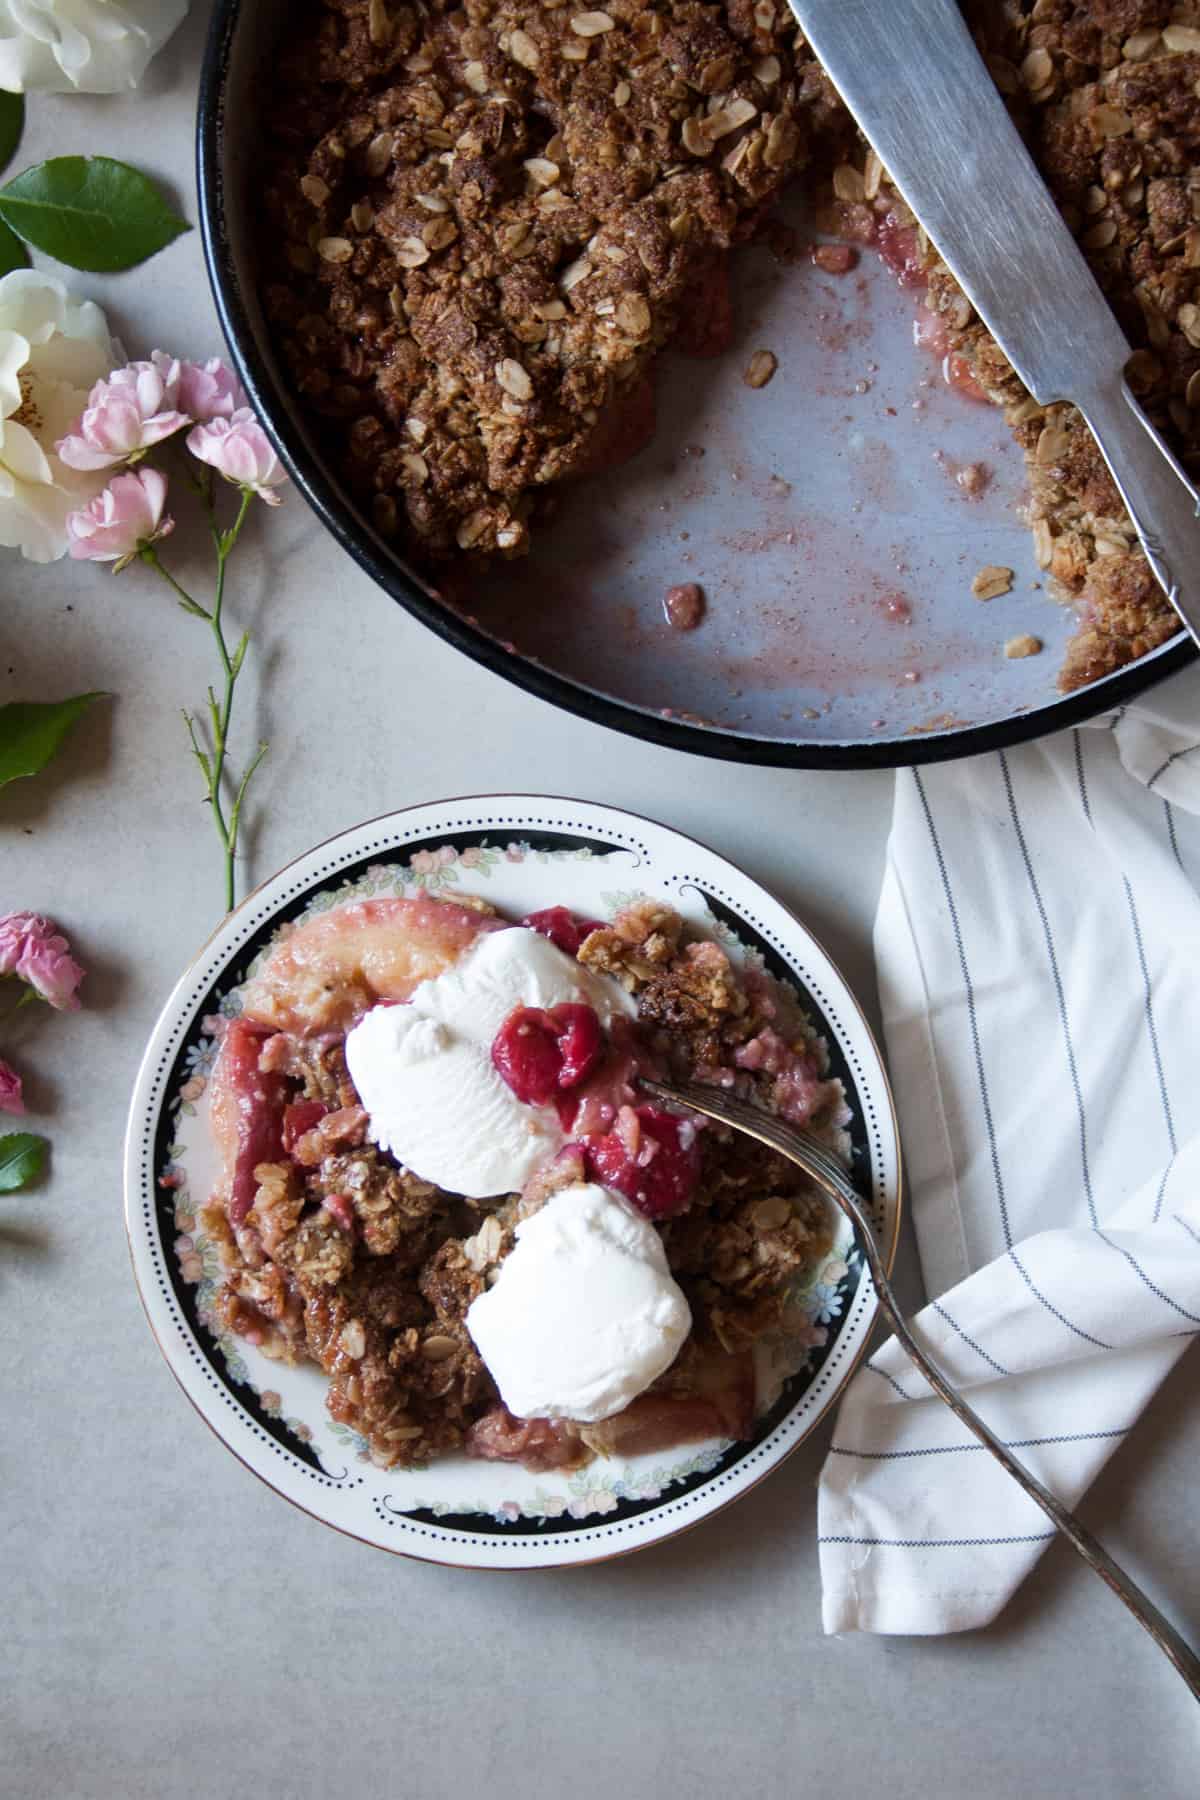 Gluten Free Strawberry Vanilla Crumble, LOW FODMAP friendly + vegan, nut free and naturally sweetened.Perfect quick, economic and nutritious dessert.